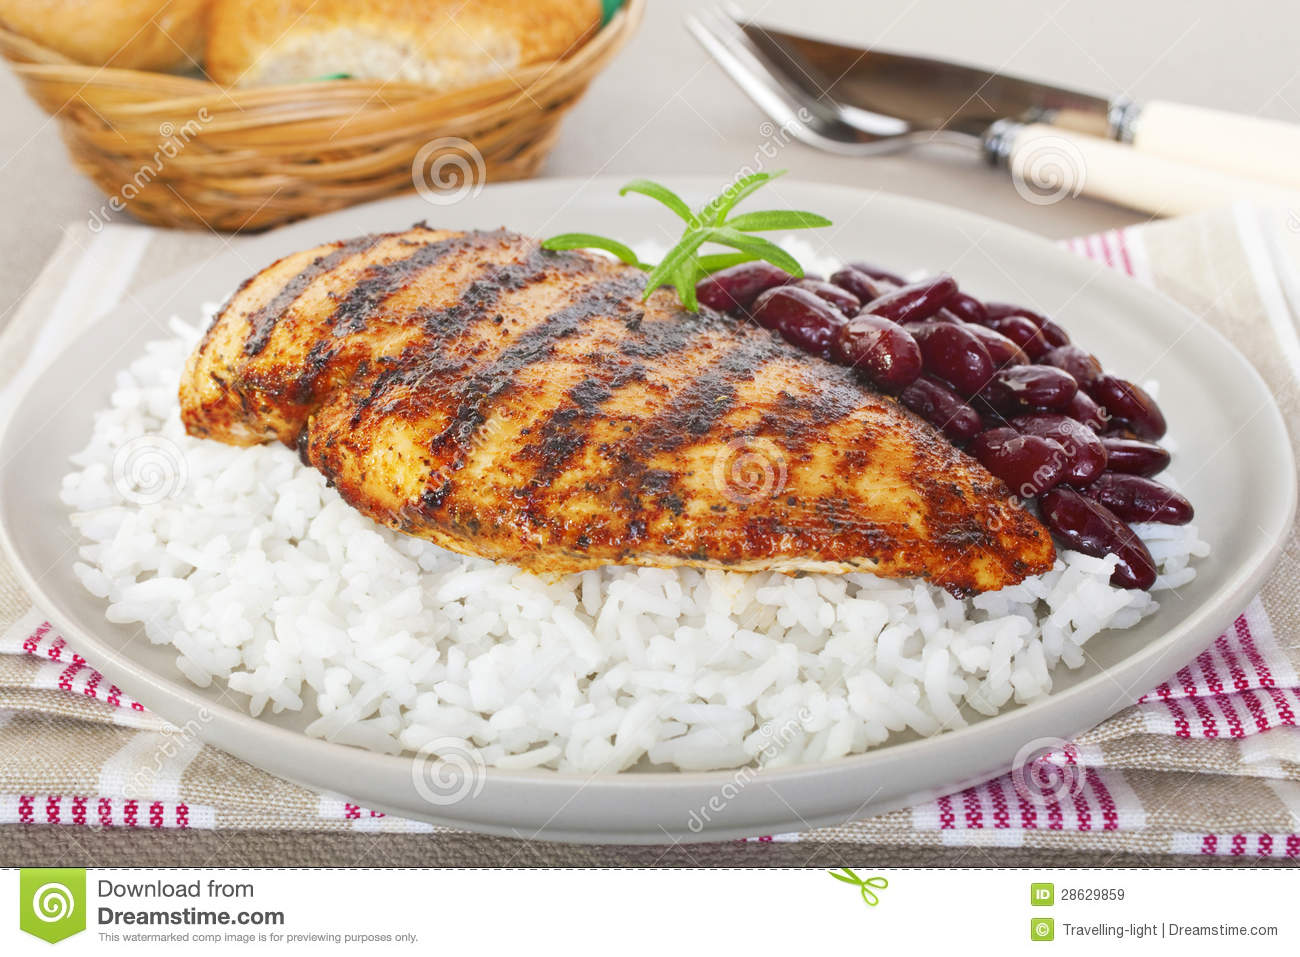 Cajun Chicken With Rice And Beans Royalty Free Stock Images   Image